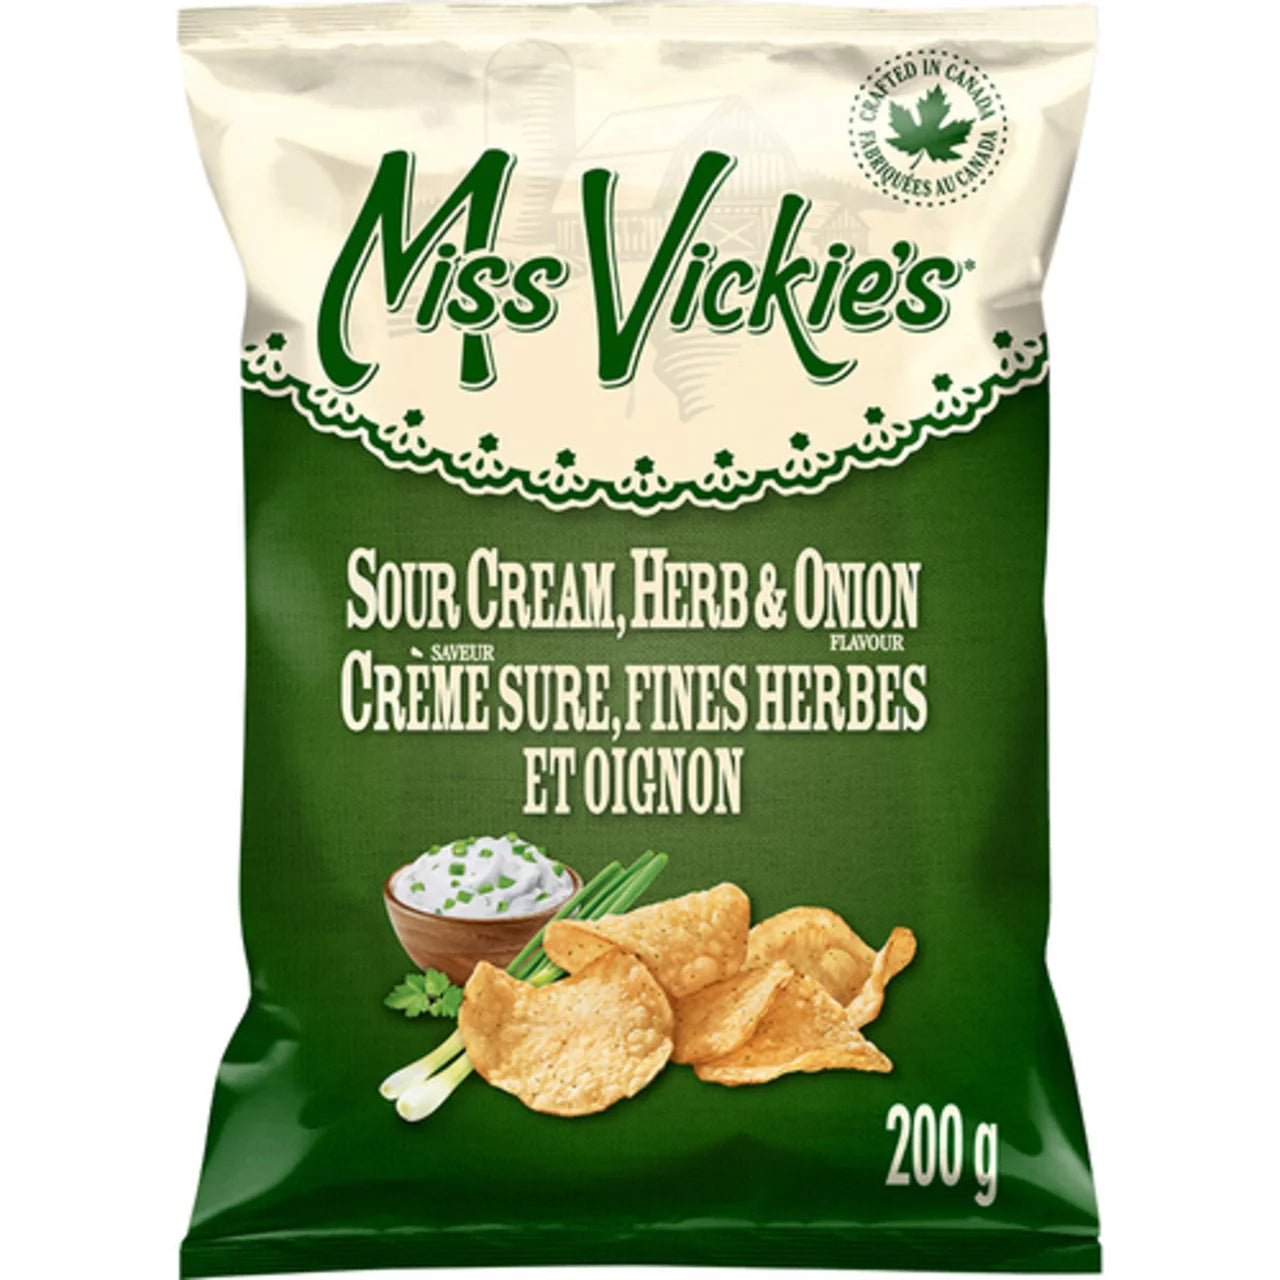 Miss Vickies Kettle Cooked Sour Cream, Herb & Onion Potato Chips, 200g, front of bag.